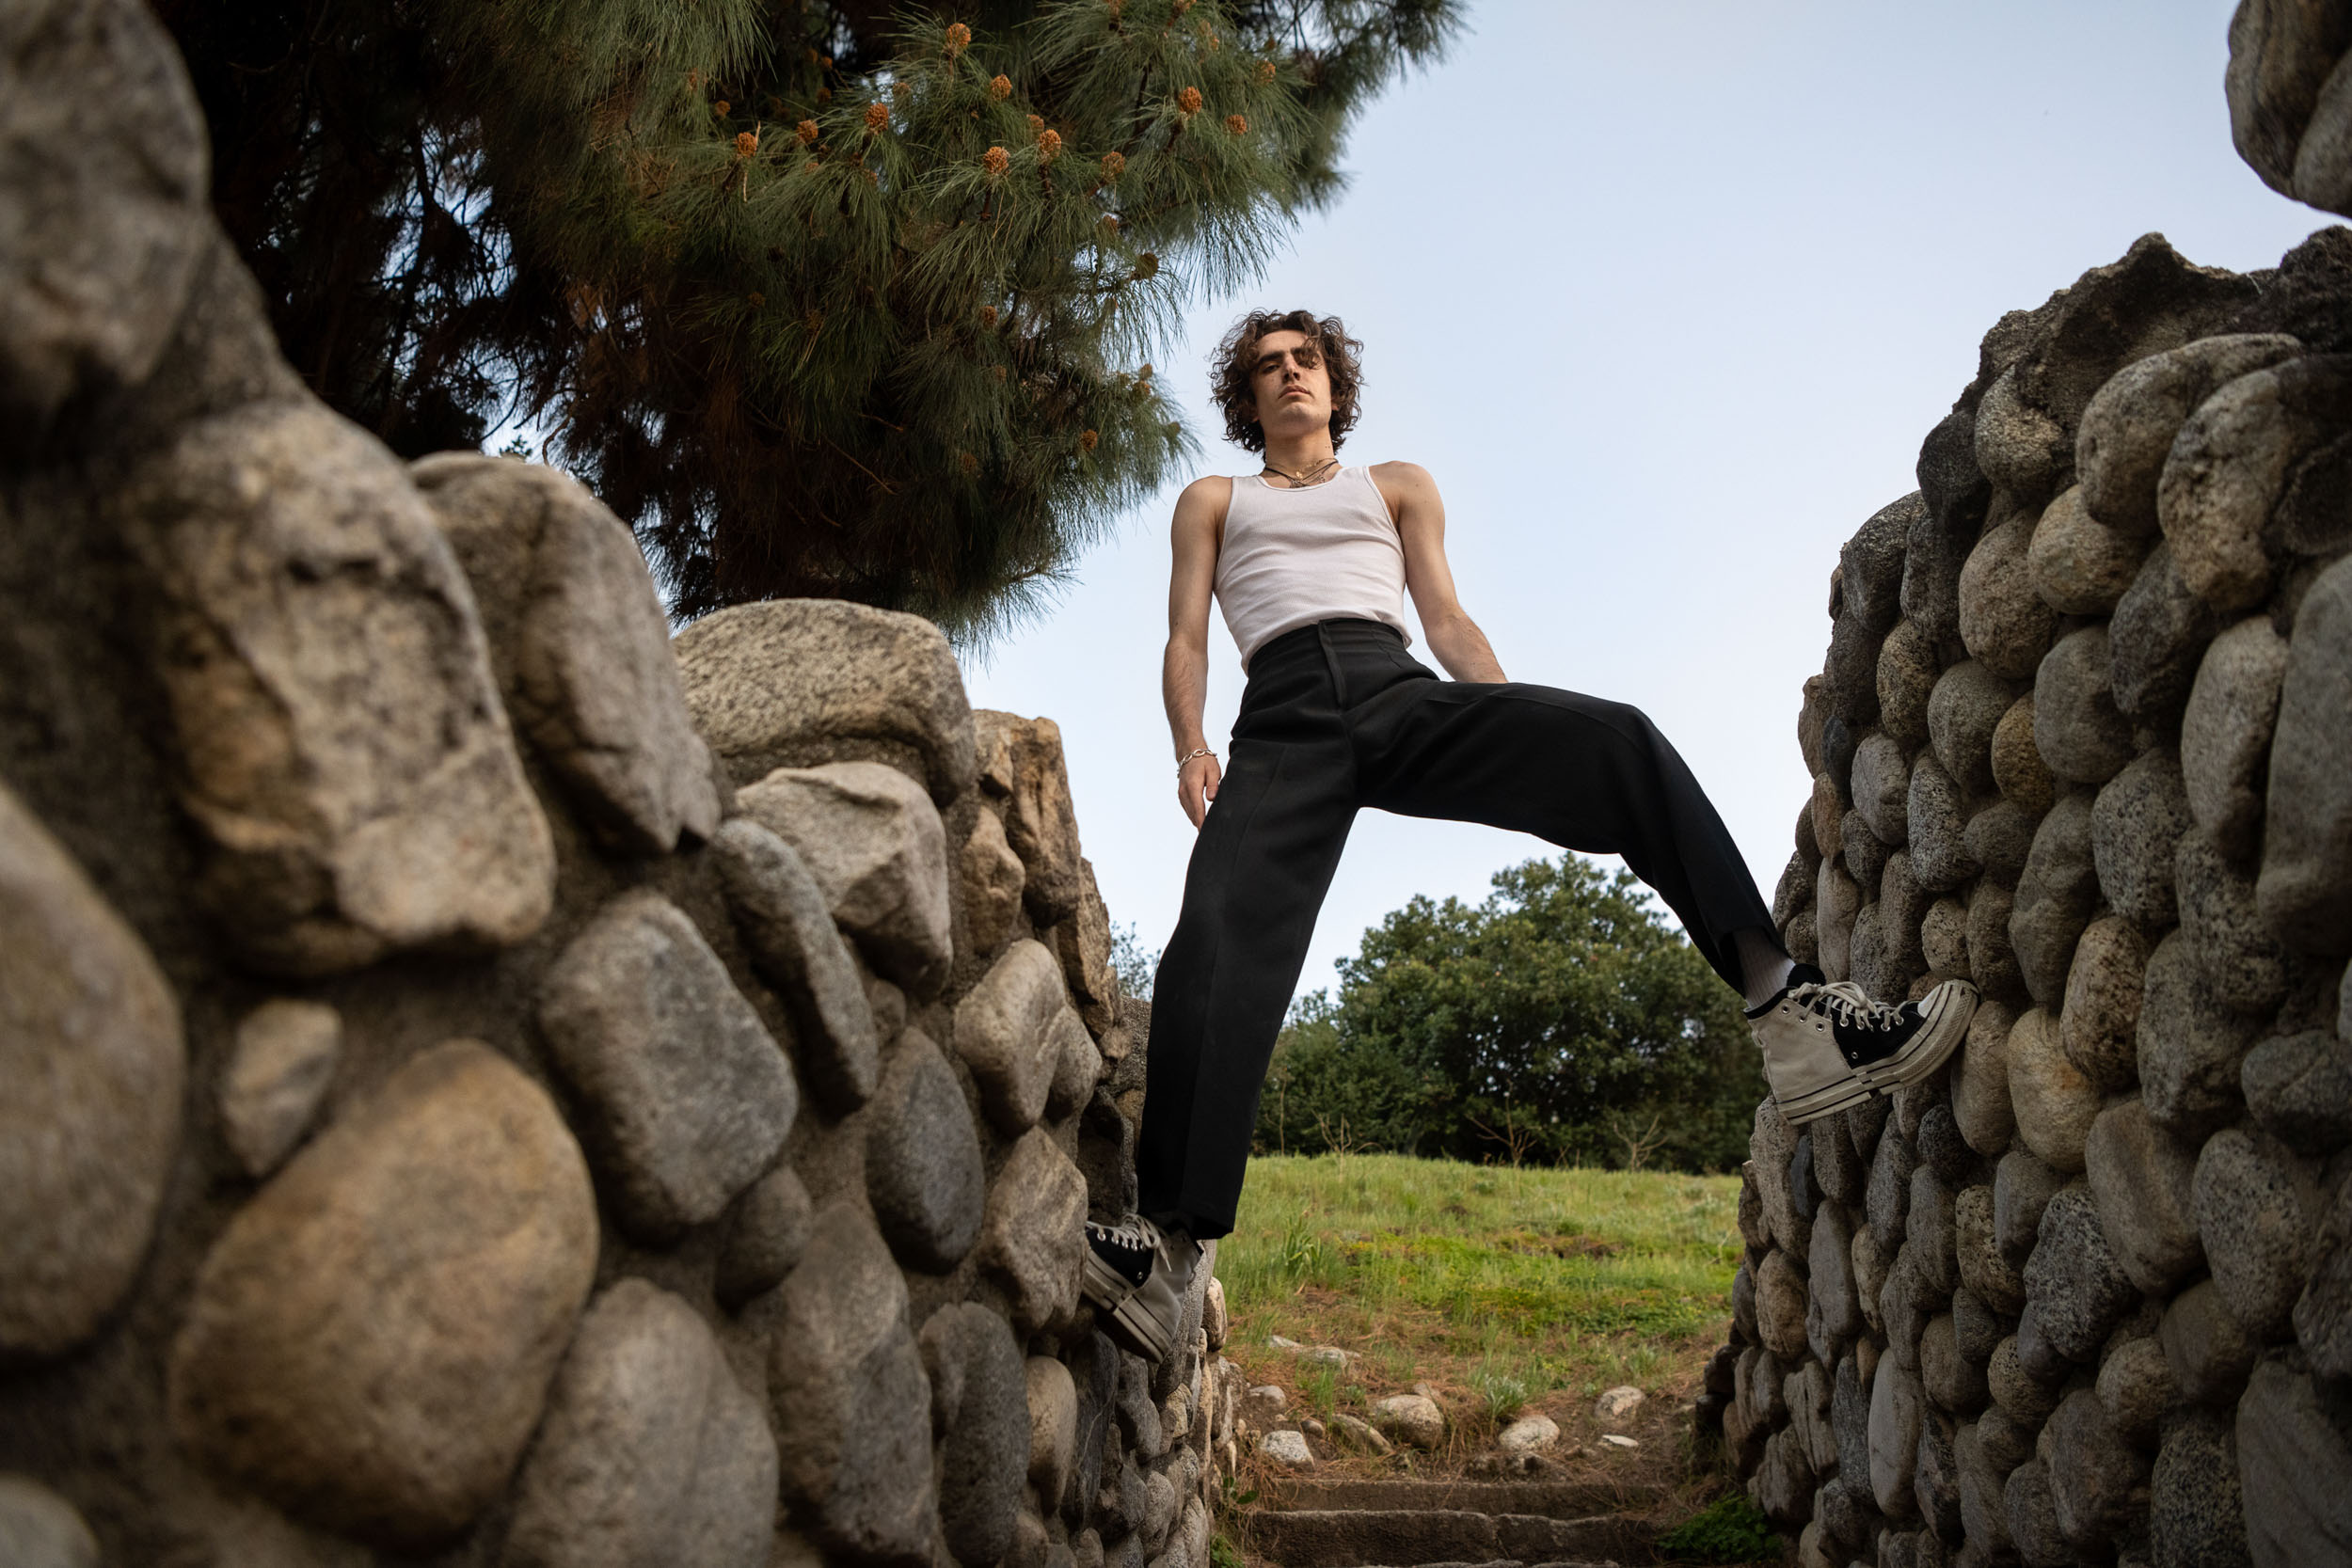 A male model stands over a stone staircase in Los Angeles.